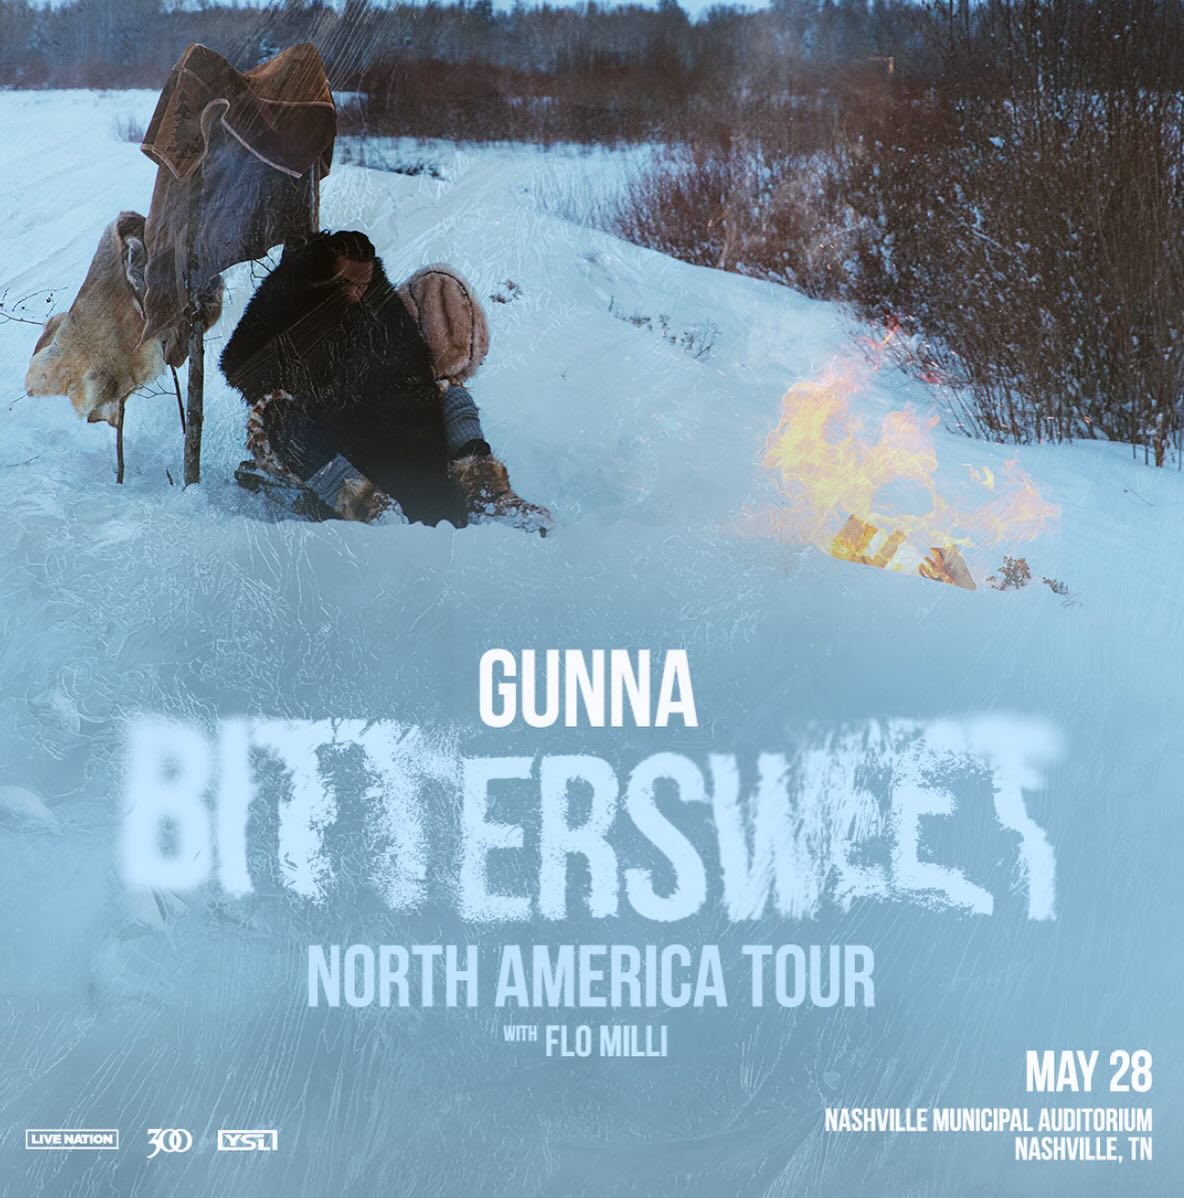 ***NEW SHOW ALERT*** 🚨 GUNNA, along with Special Guest Flo Milli, will be stopping in Nashville for his The Bittersweet Tour on Tuesday, May 28 at the Nashville Municipal Auditorium! Tickets go ON SALE Friday, February 23 at 10AM CST. For more info, link our bio!!